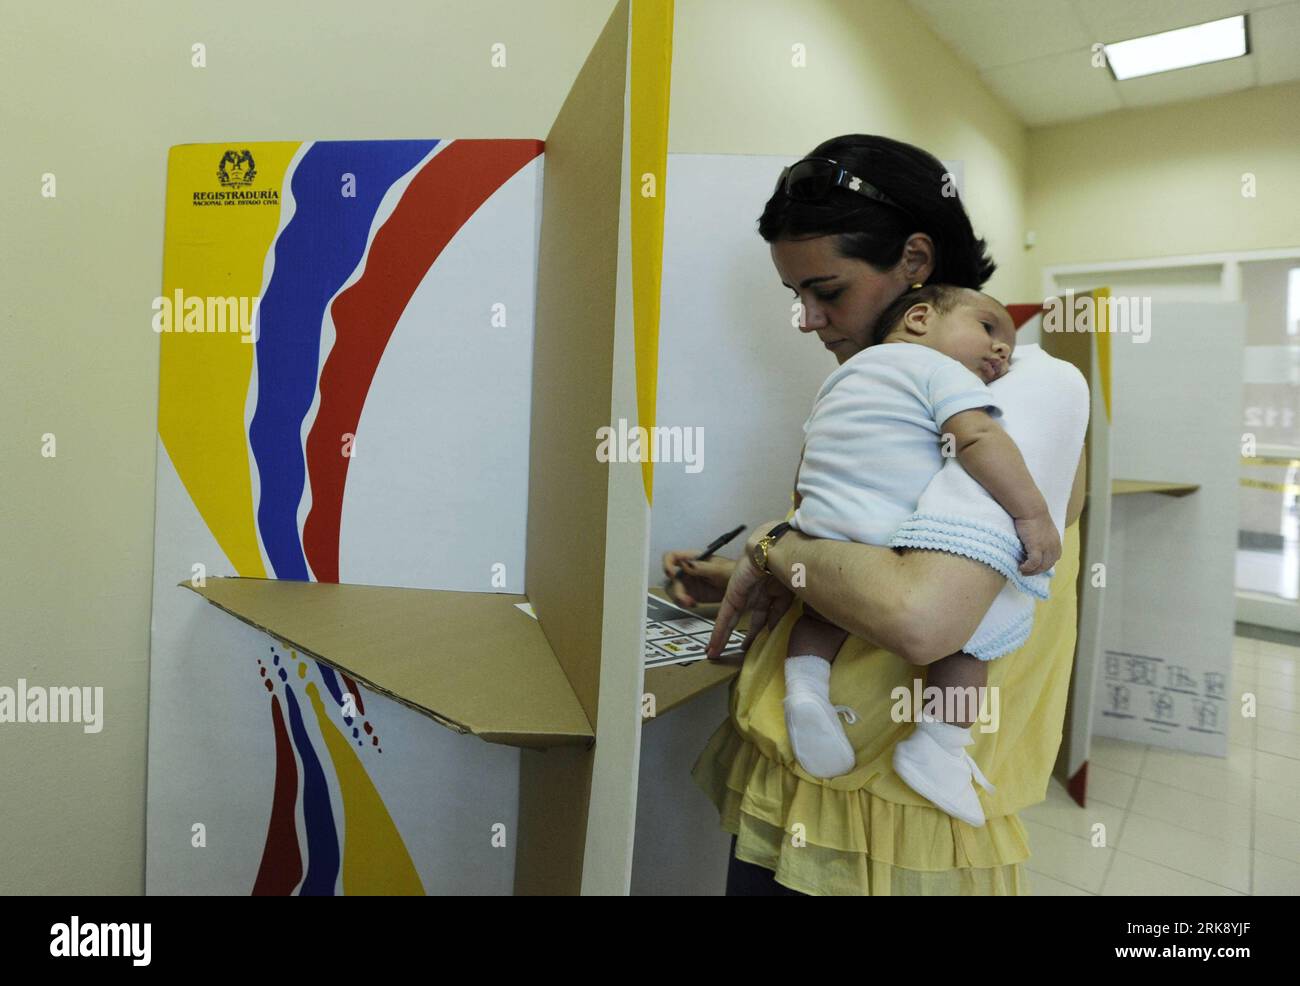 Bildnummer: 54089764  Datum: 30.05.2010  Copyright: imago/Xinhua (100531) -- PANAMA CITY, May 31, 2010 (Xinhua) -- A Colombian woman living in Panama fills in the ballot for the Colombian presidential election at a polling station in Panama City, capital of Panama, May 30, 2010. The presidential election of Colombia kicked off at 08:00 a.m. local time (1300 GMT) and over 29 millions voters headed to the polling stations to elect a successor to incumber President Alvaro Uribe. Polling stations were set up all over the neighboring country of Panama, which has a large Colombian population. (Xinhu Stock Photo